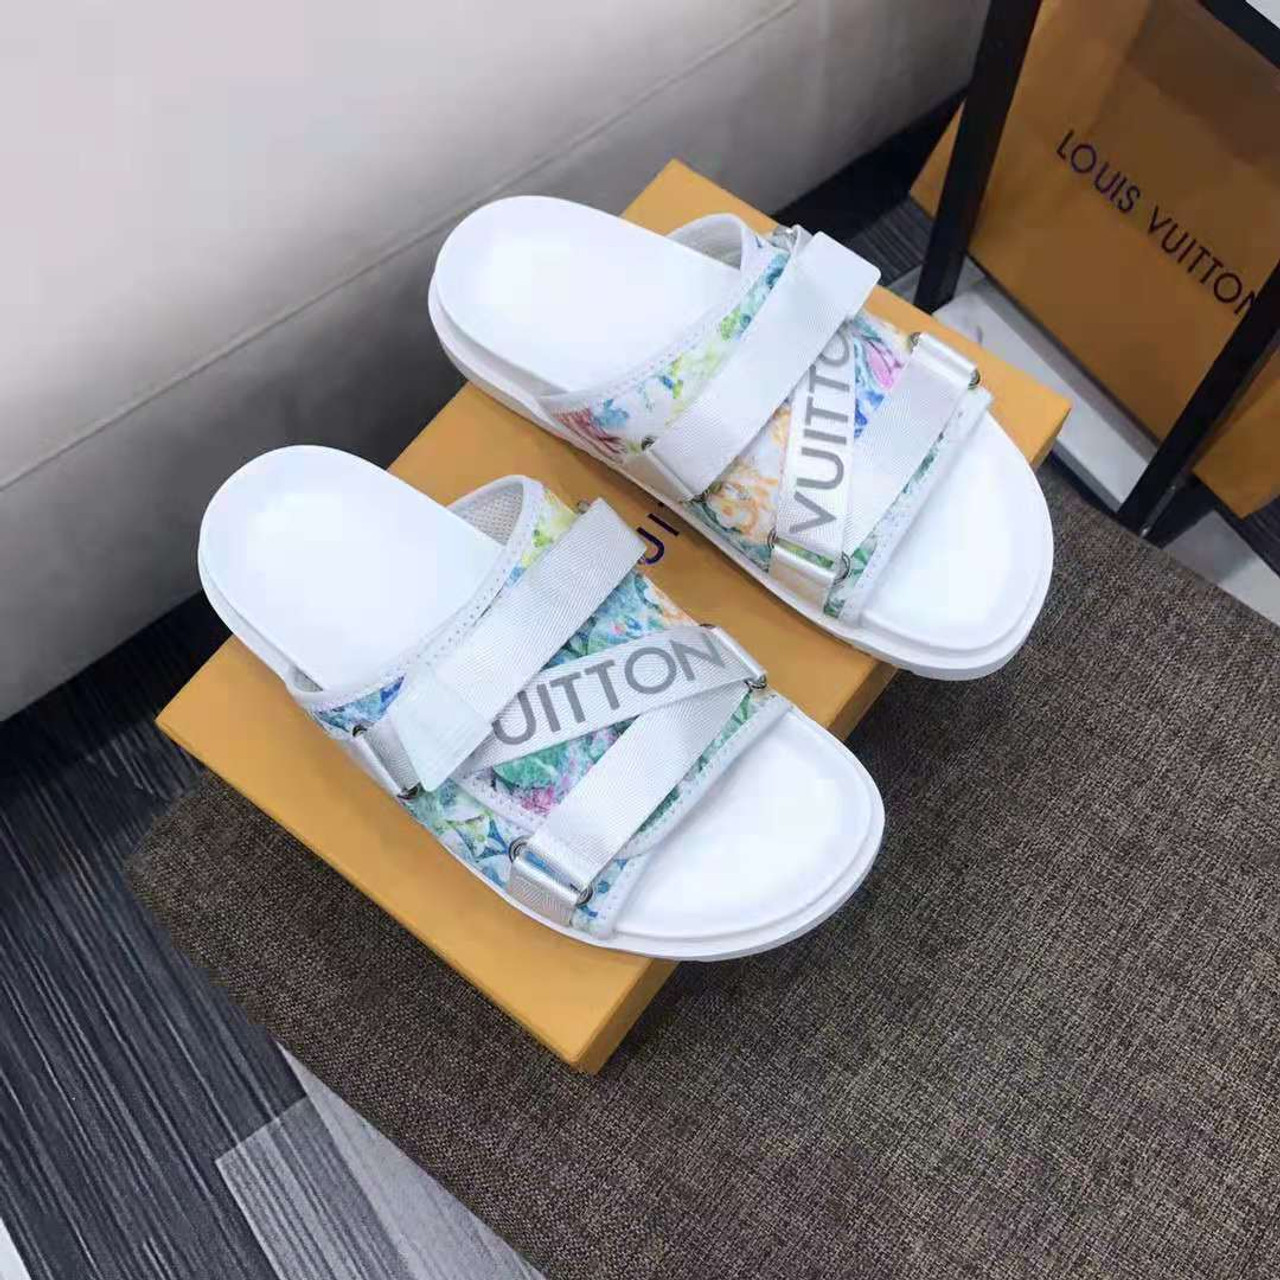 Look at these Super Cute Louis Vuitton Summer Sandals Slides Flip Flops  DHGate Replicas. Many Colors Available. Custom/Private link available. Must  have 10+ Karma. Get them now. : r/DHGateRepLadies